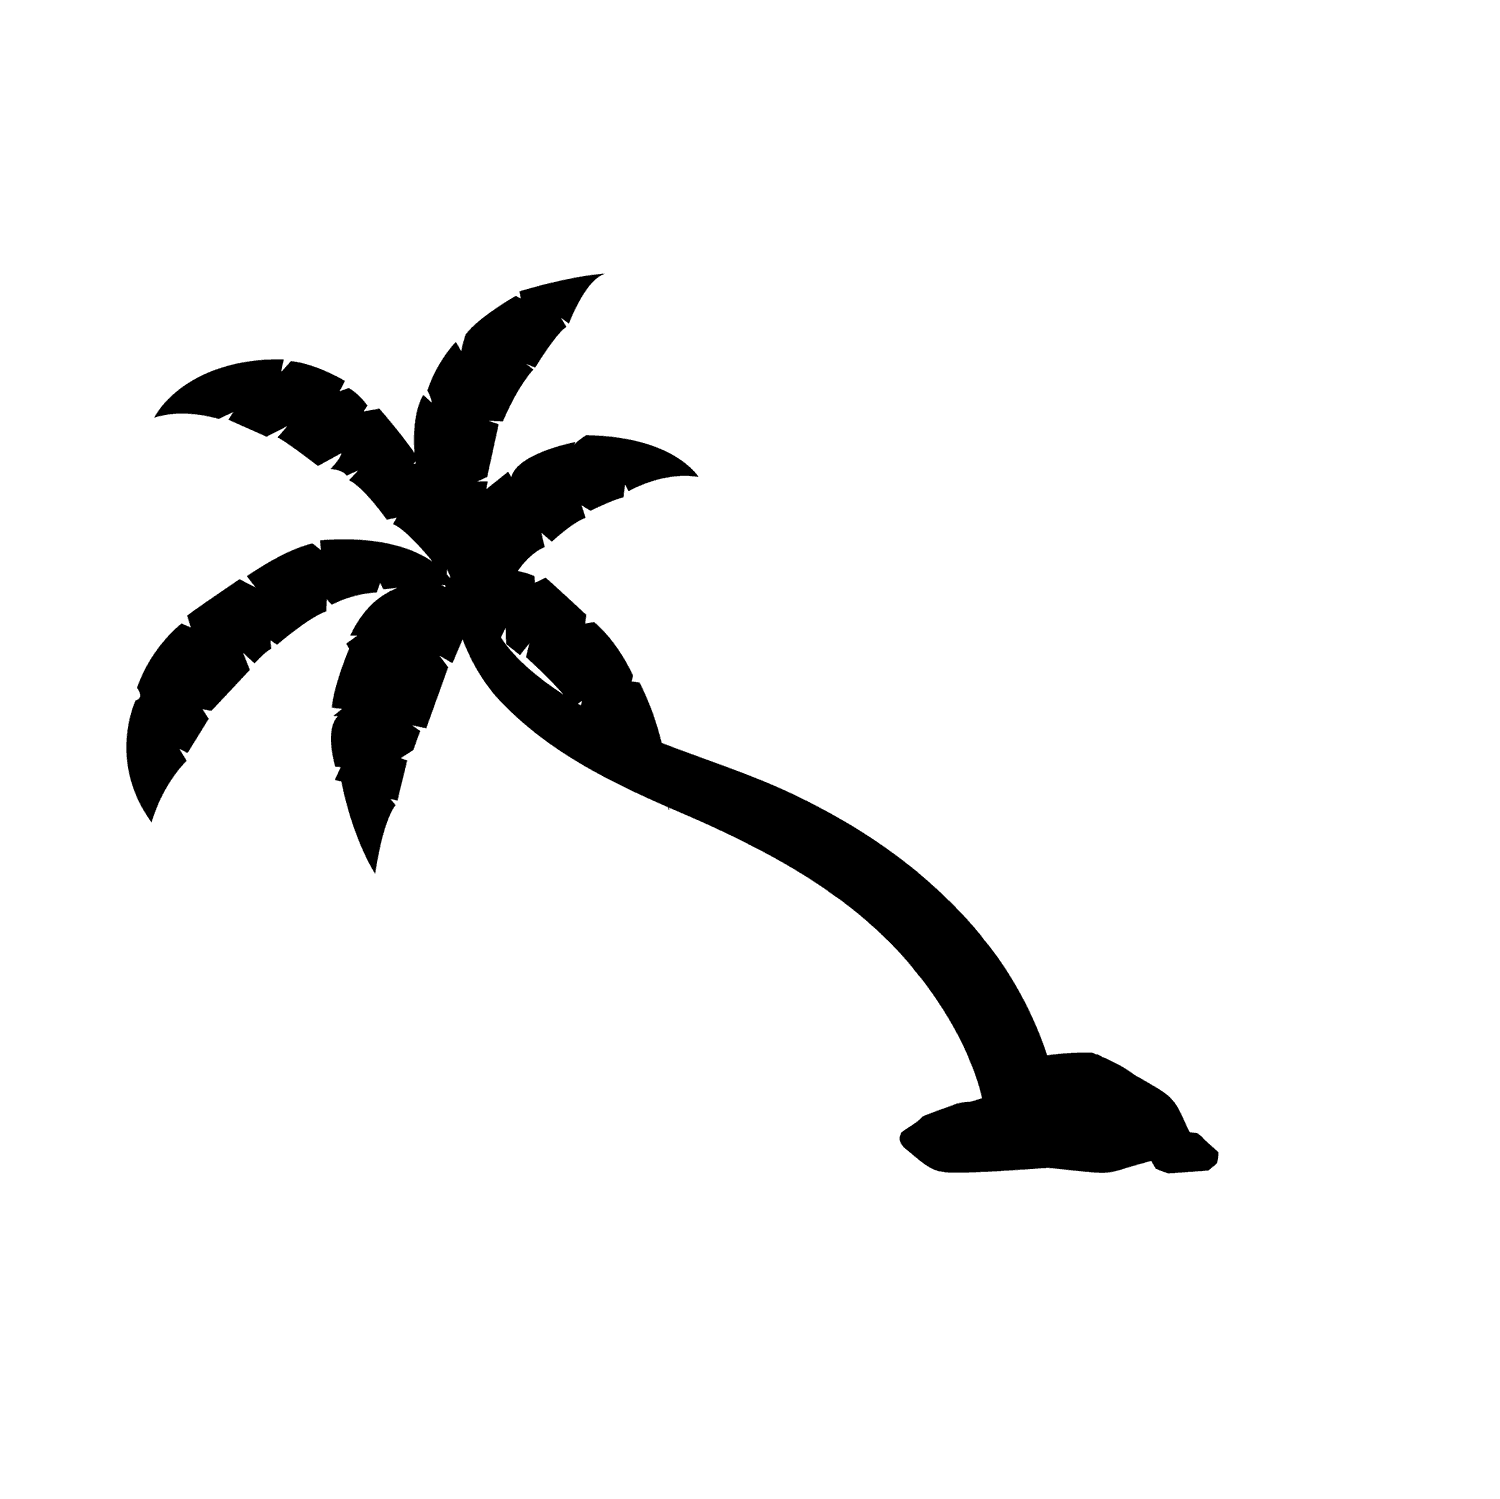 coconut palm tree silhouettes in a minimalist style